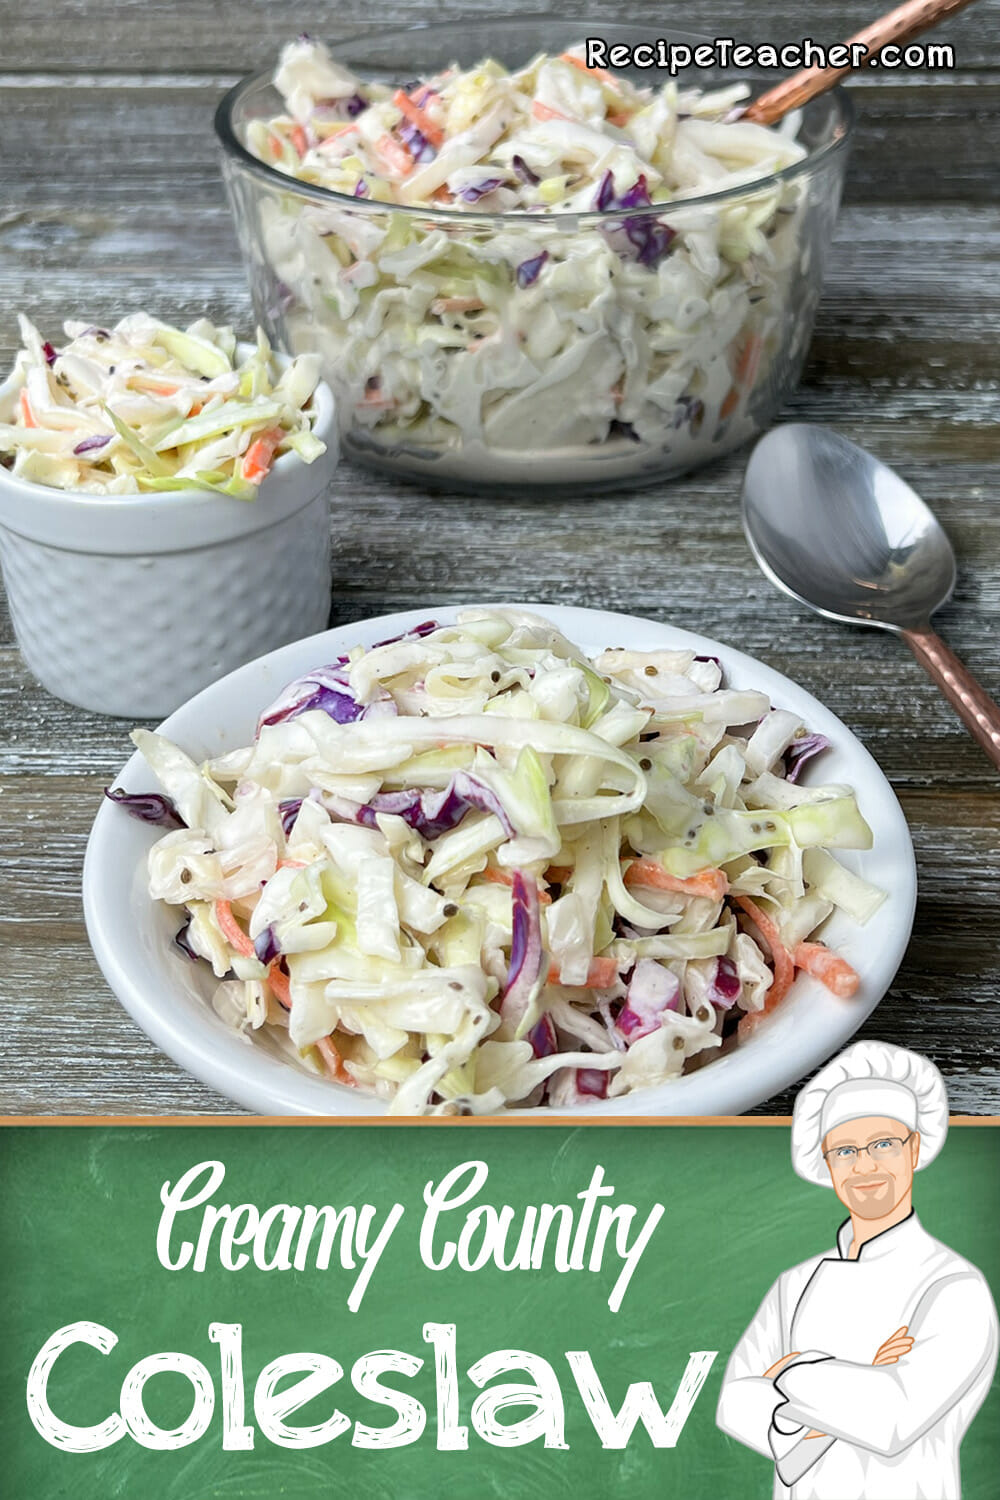 Recipe for creamy country coleslaw